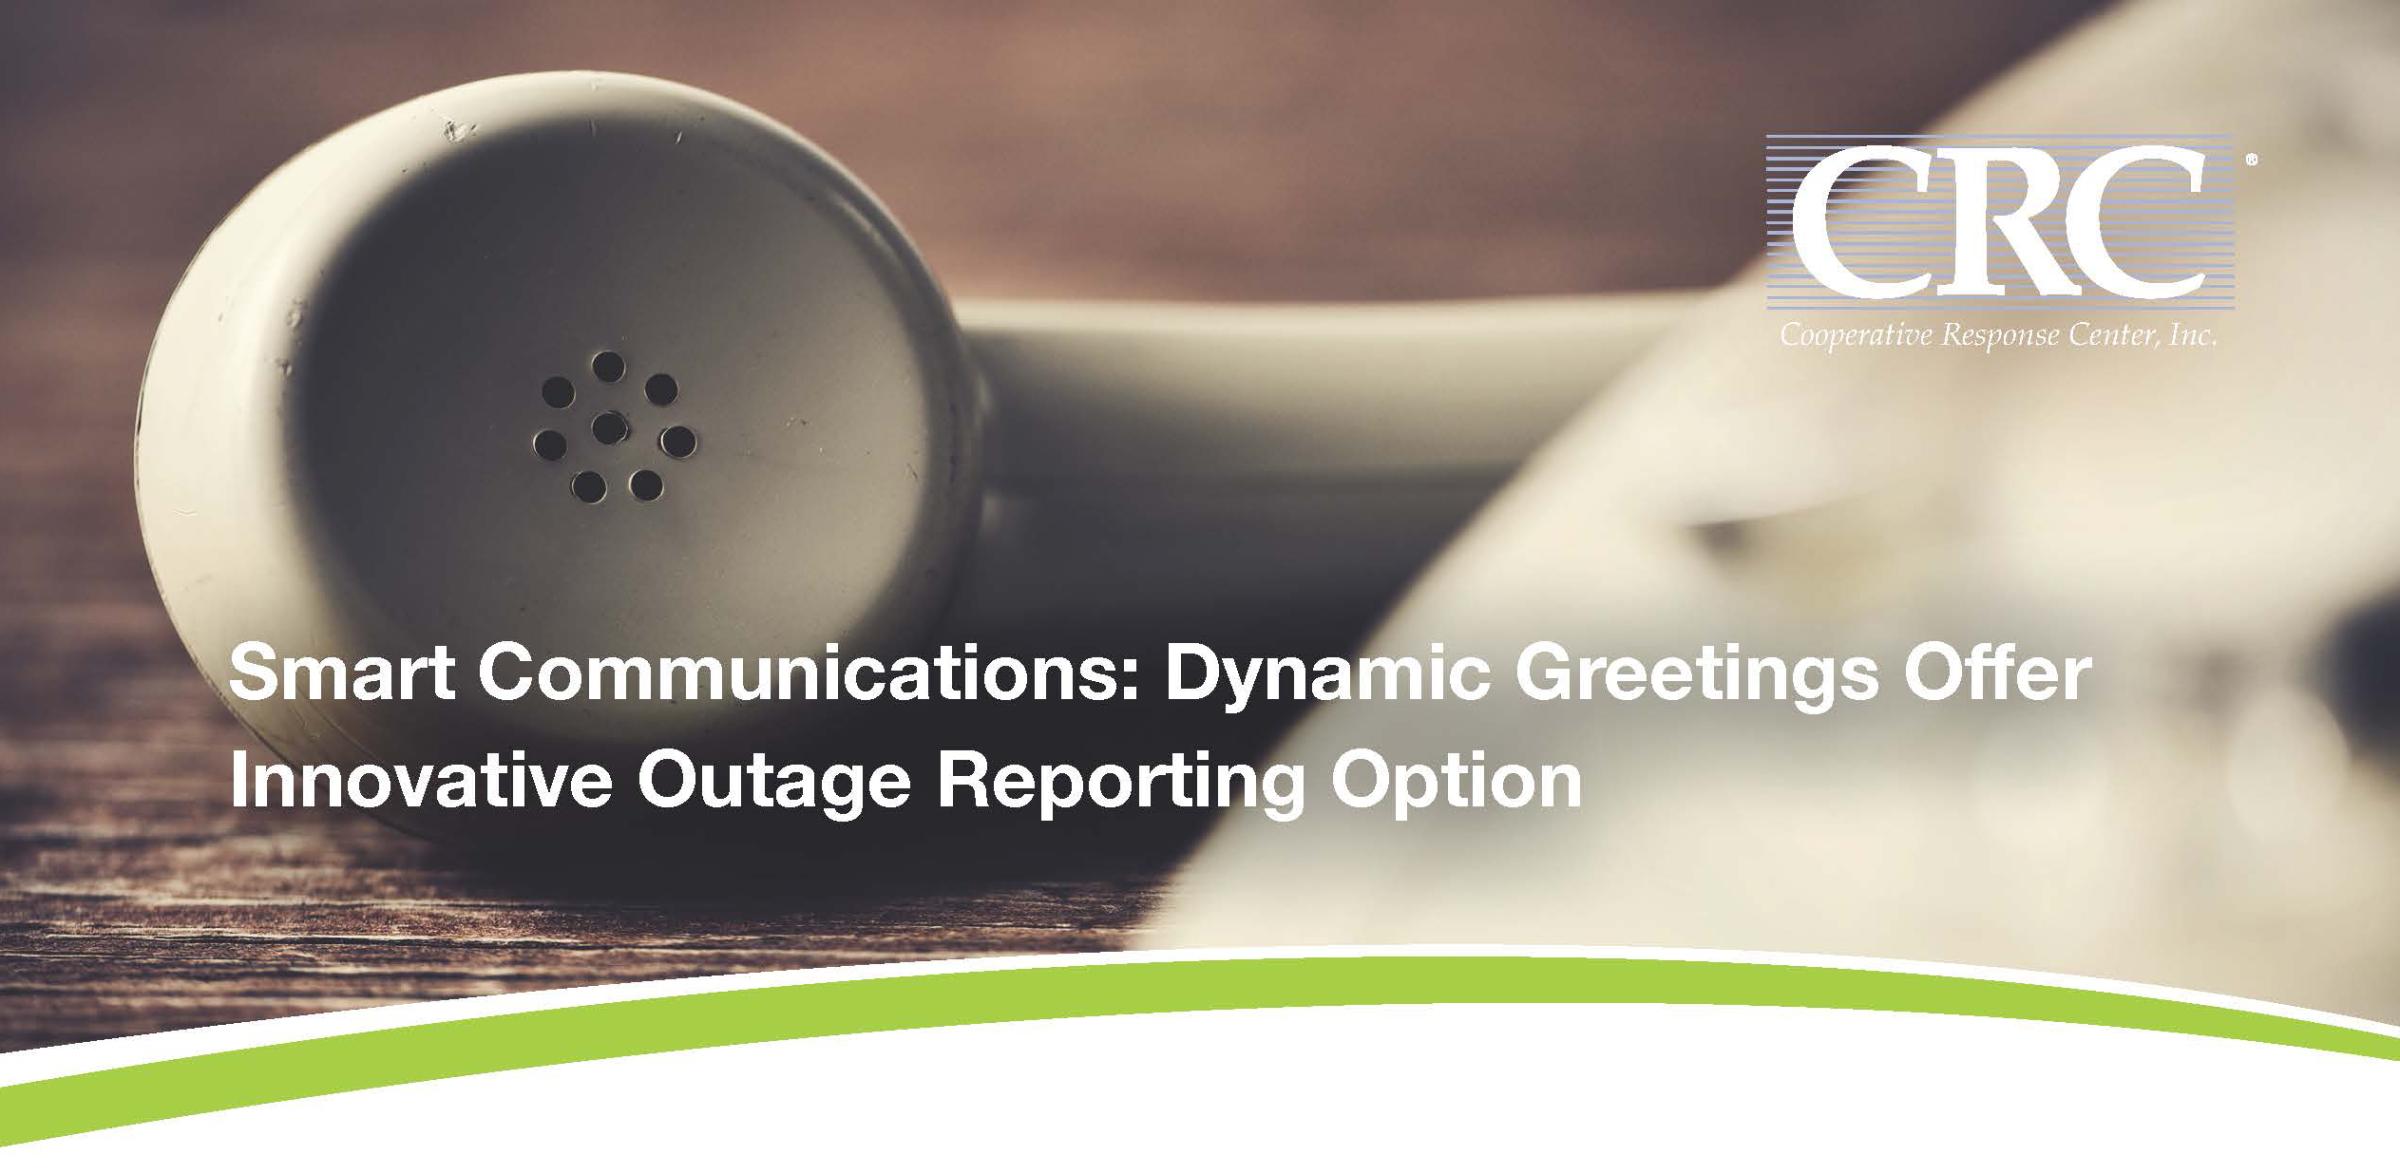 Smart Communications: Dynamic Greetings Offer Innovative Outage Reporting Option